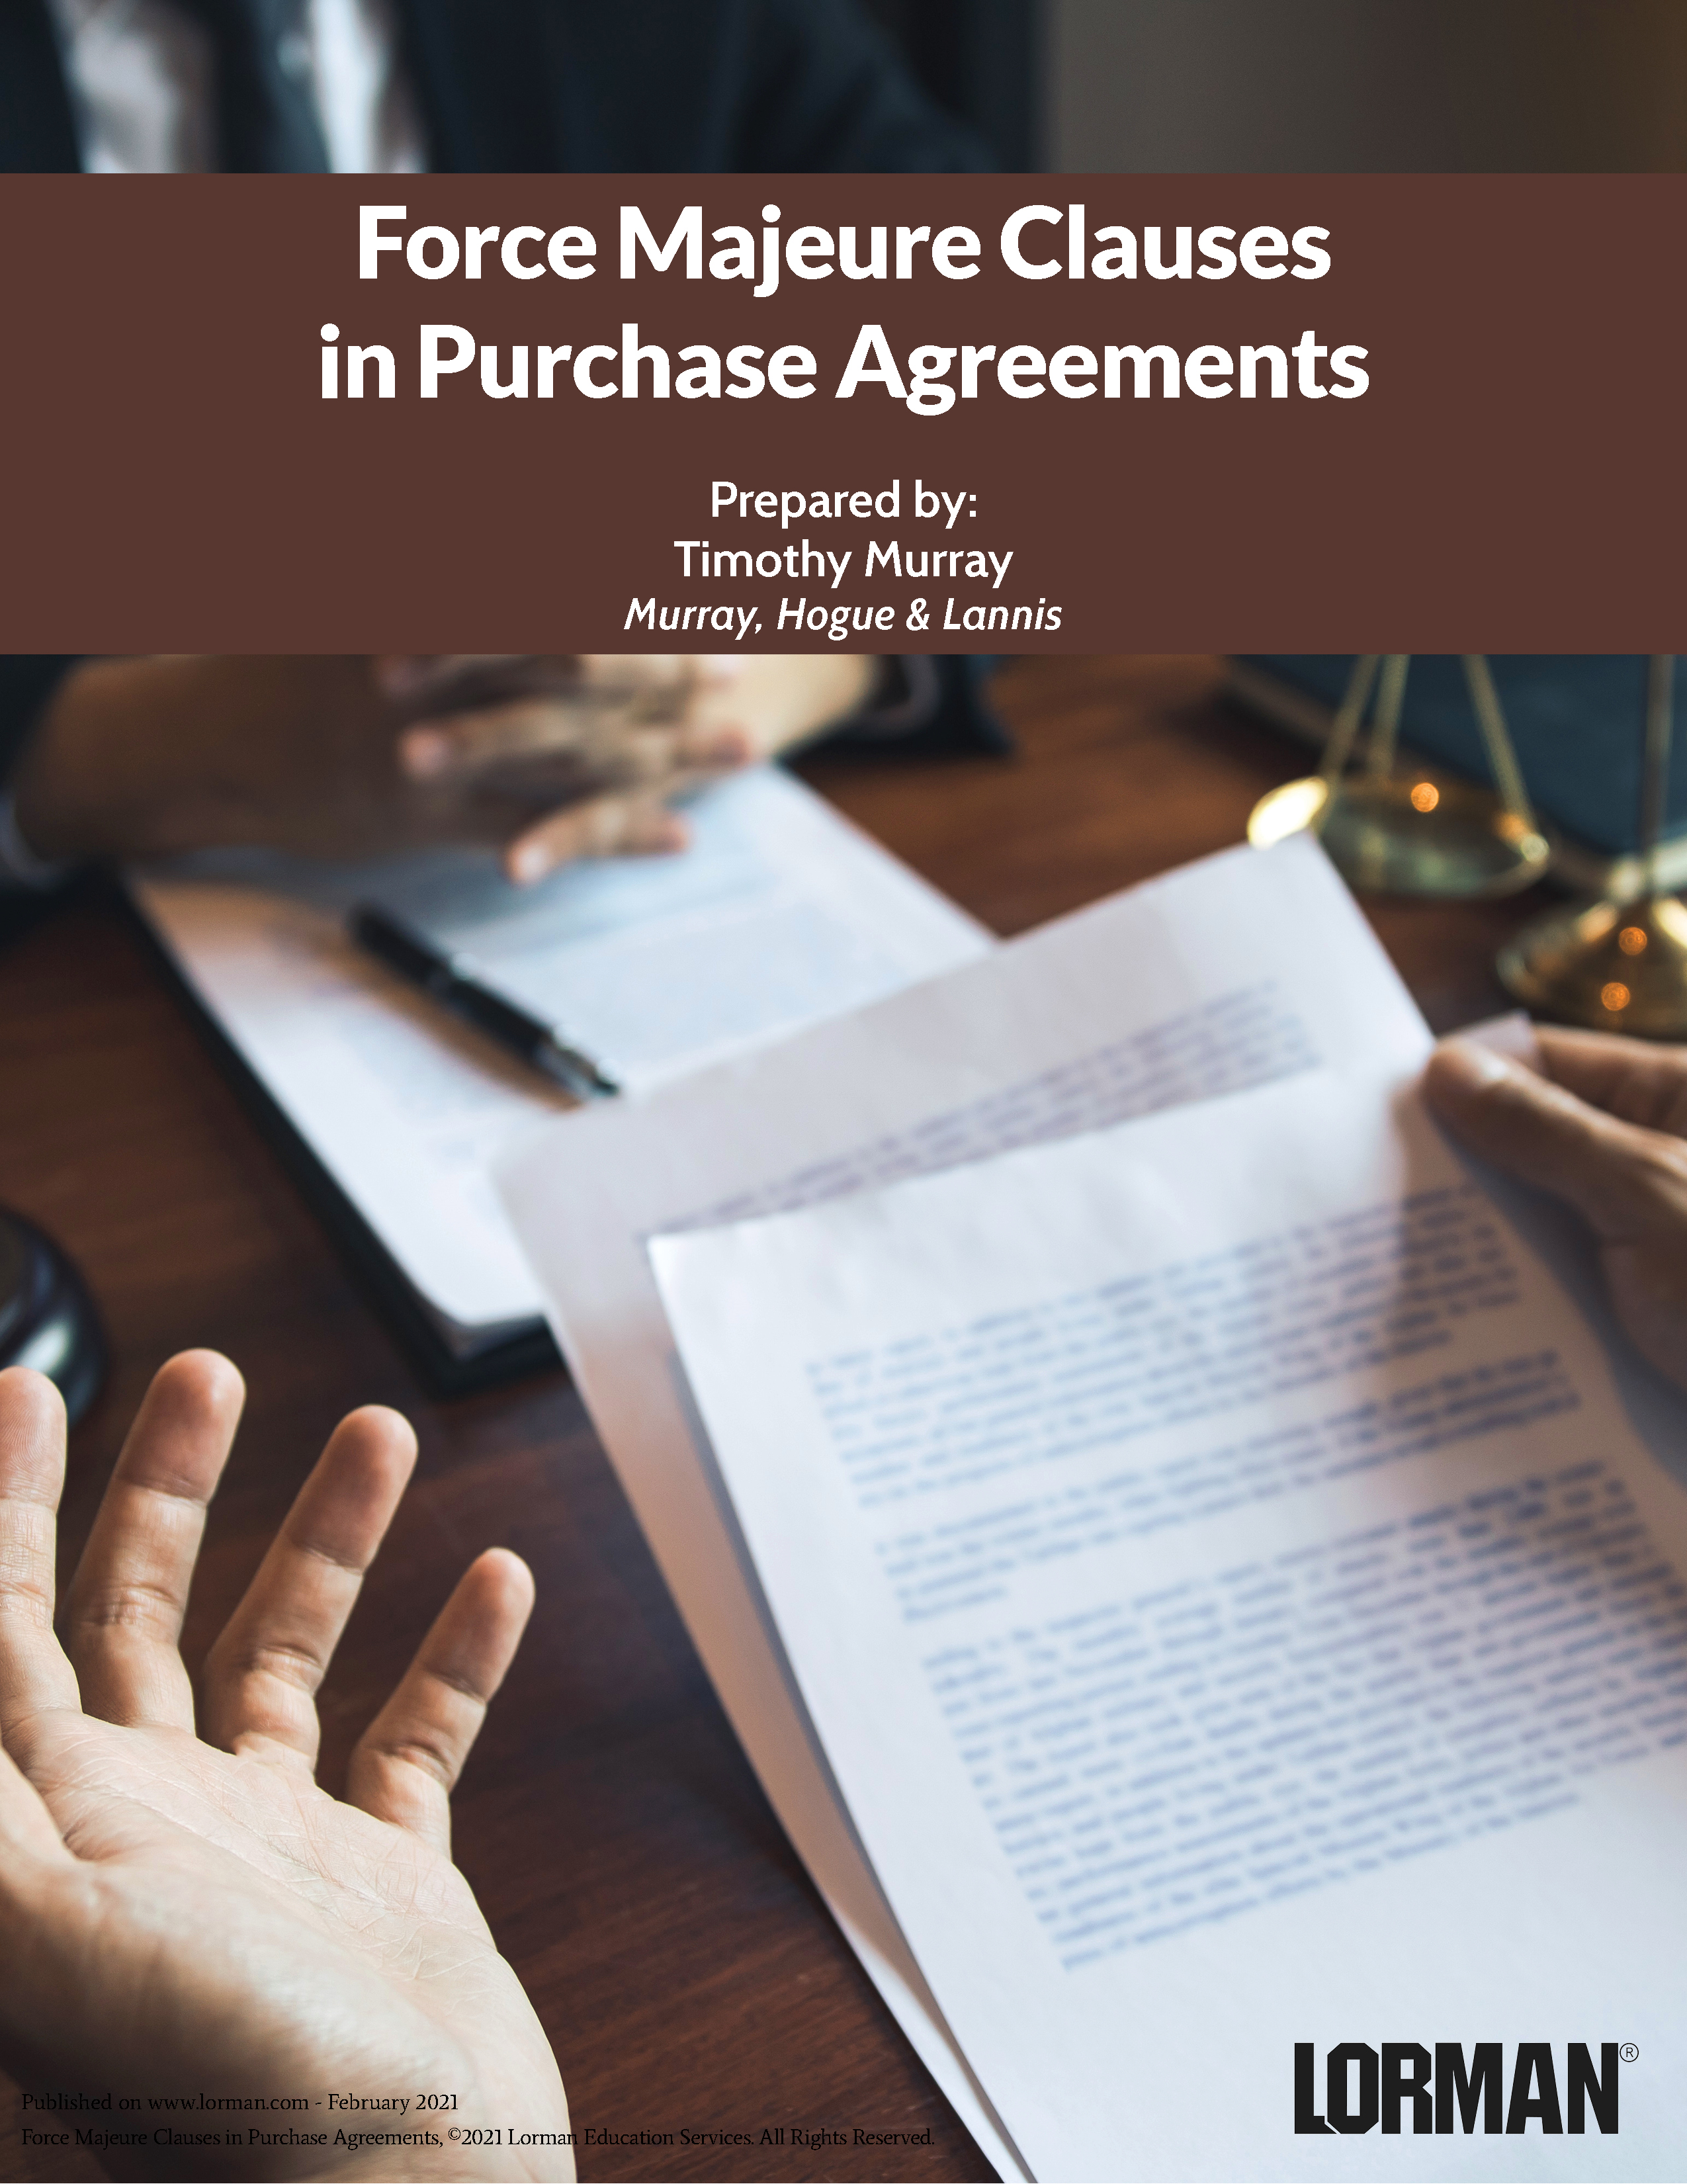 Force Majeure Clauses in Purchase Agreements